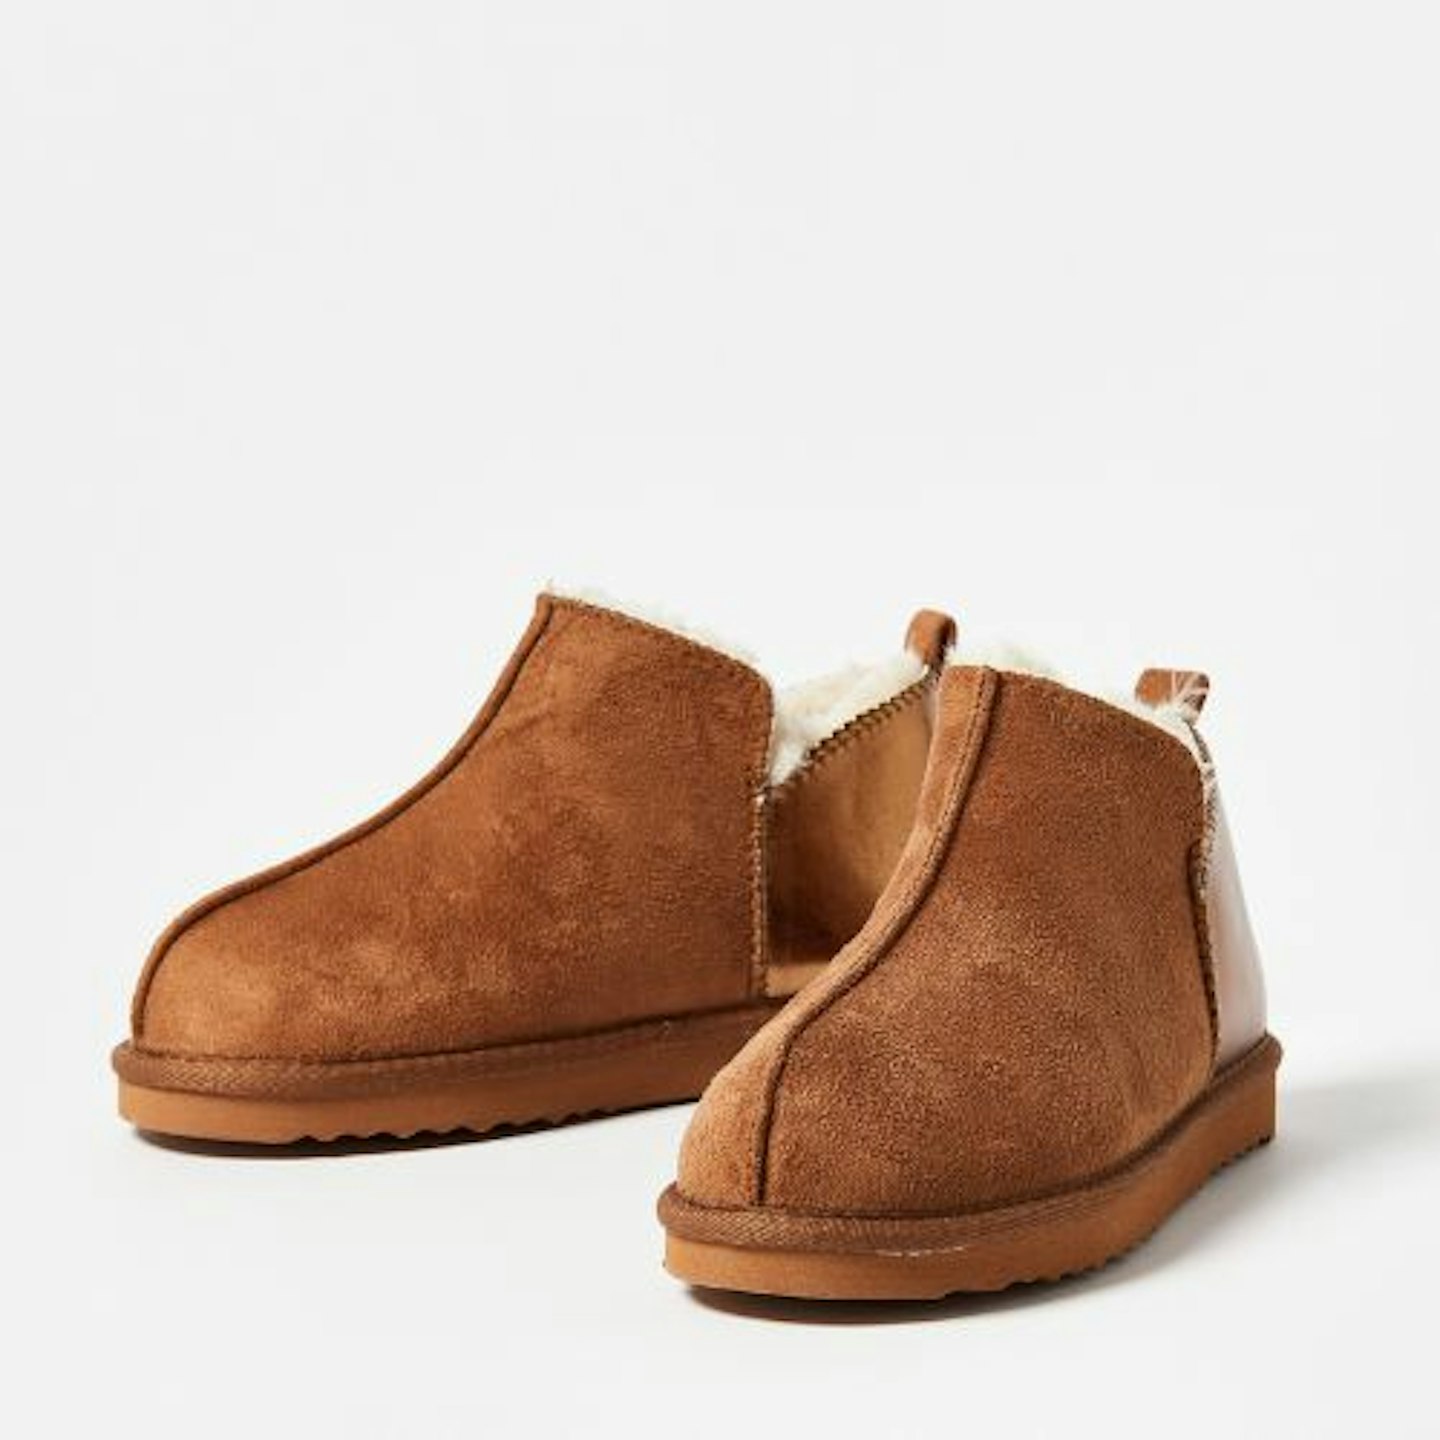 Oliver Bonas, Metallic And Faux Suede Brown Boot Slippers